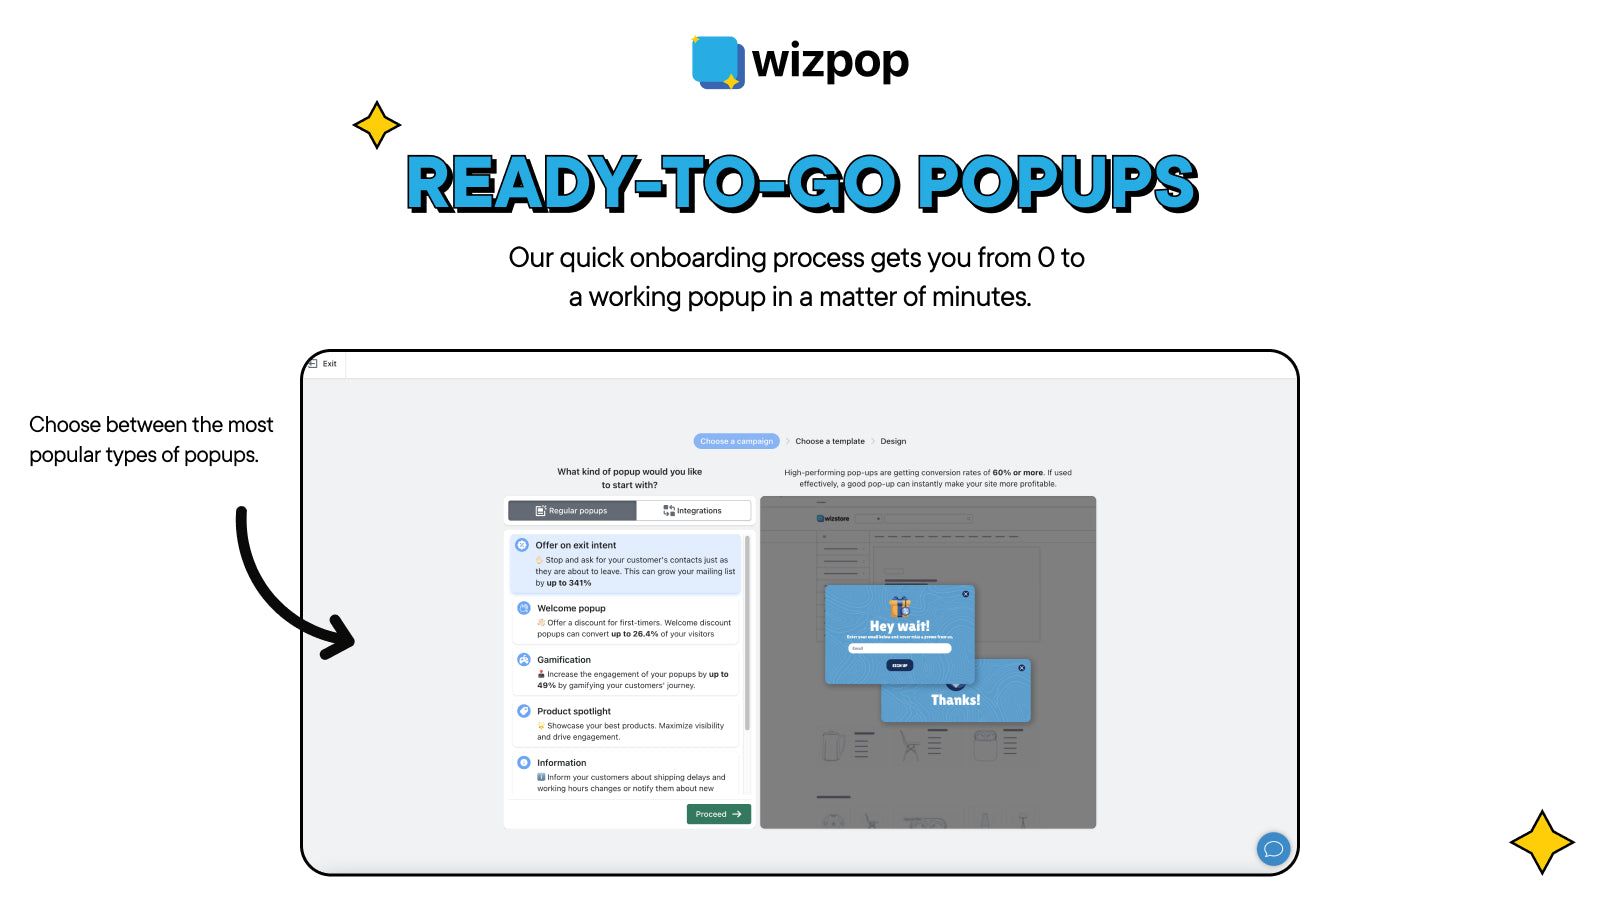 READY-TO-GO POPUPS